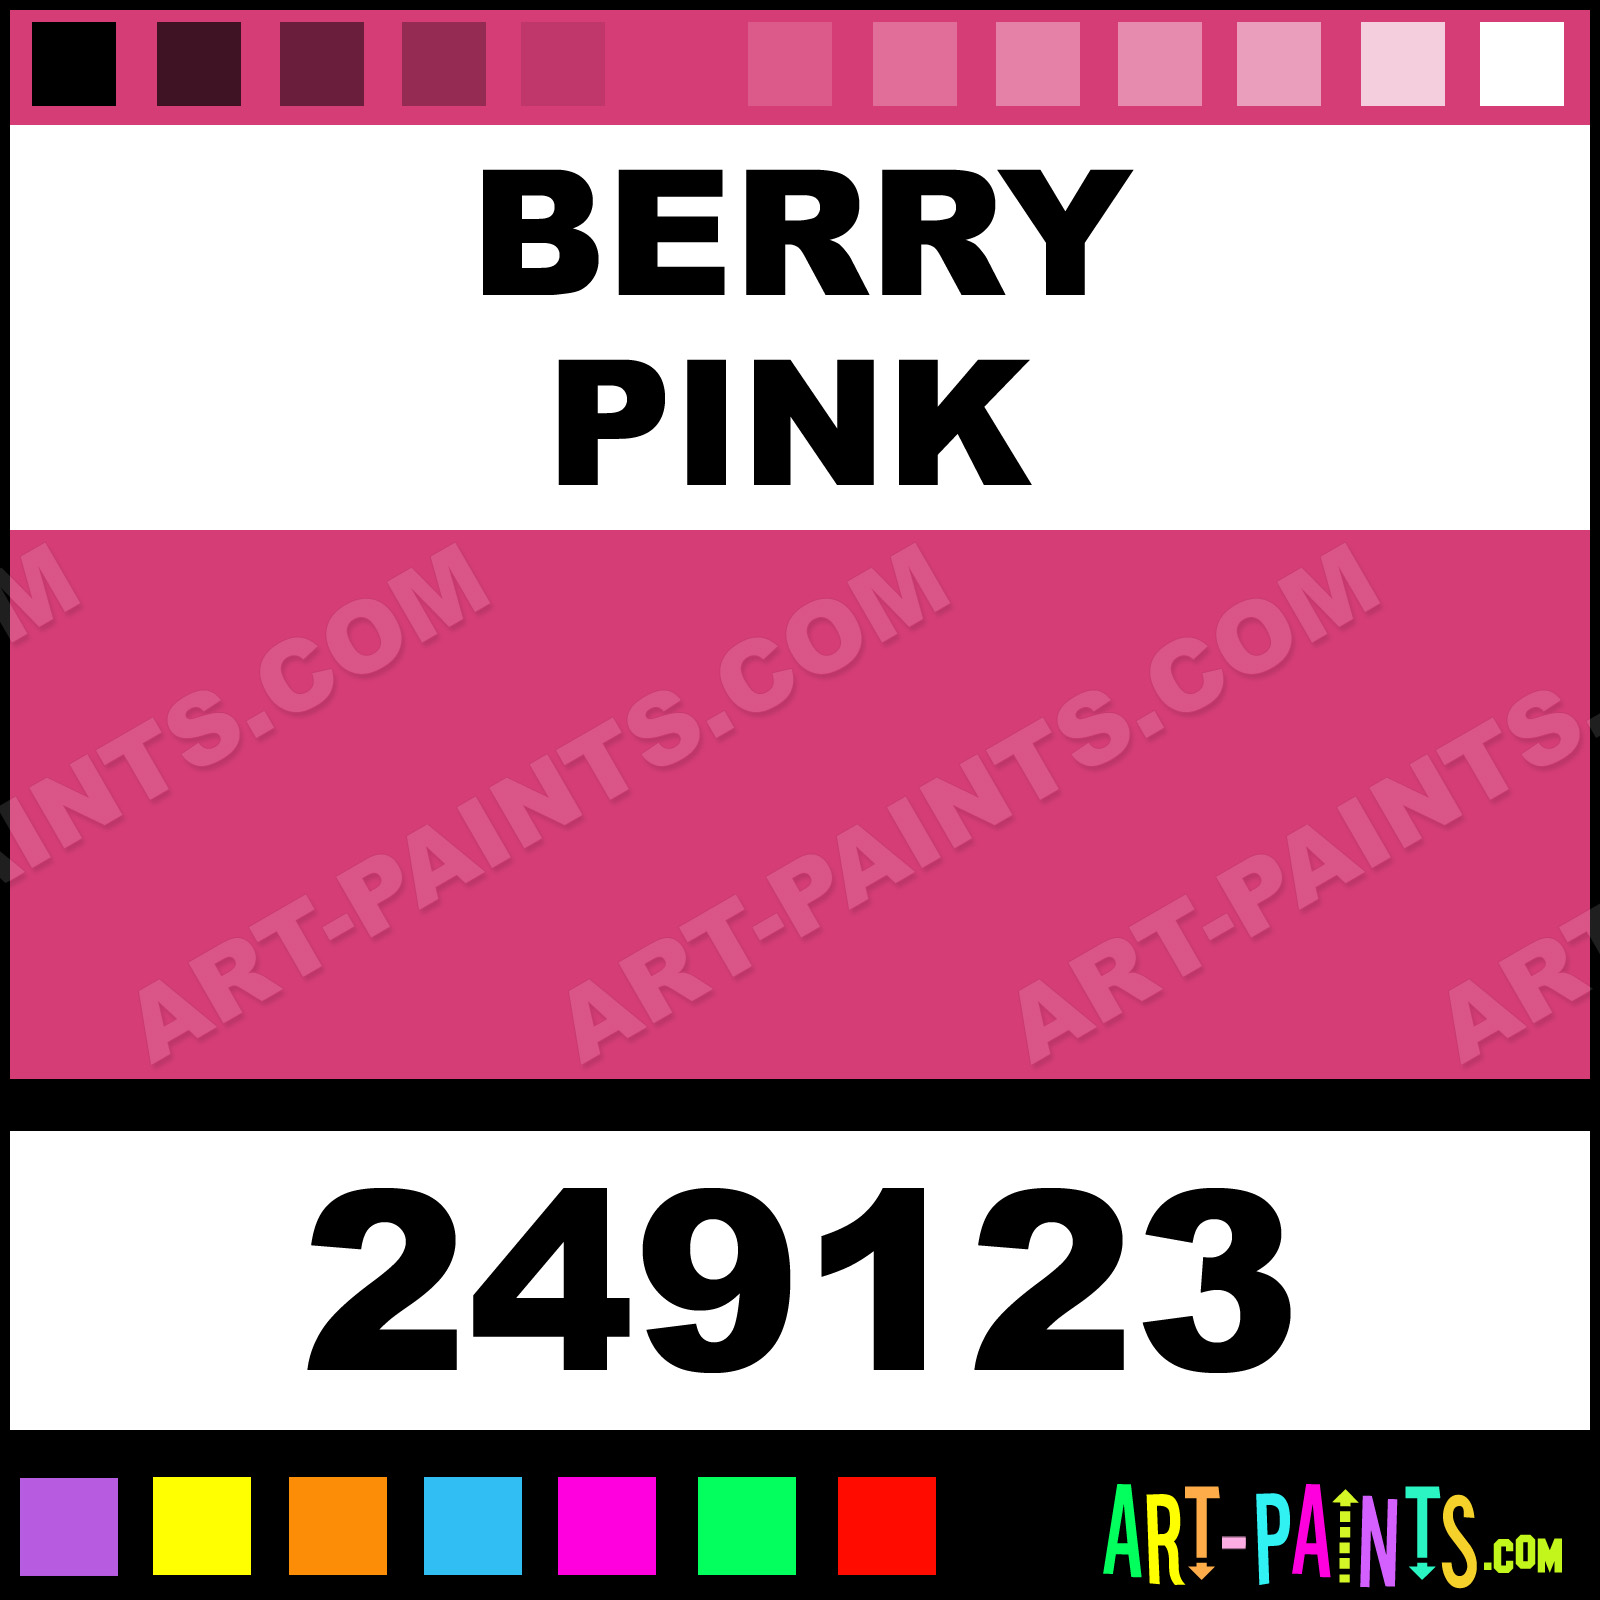 http://www.art-paints.com/Paints/Ceramic/Rust-Oleum/Ultra-Cover-2x/Berry-Pink/Berry-Pink-xlg.jpg